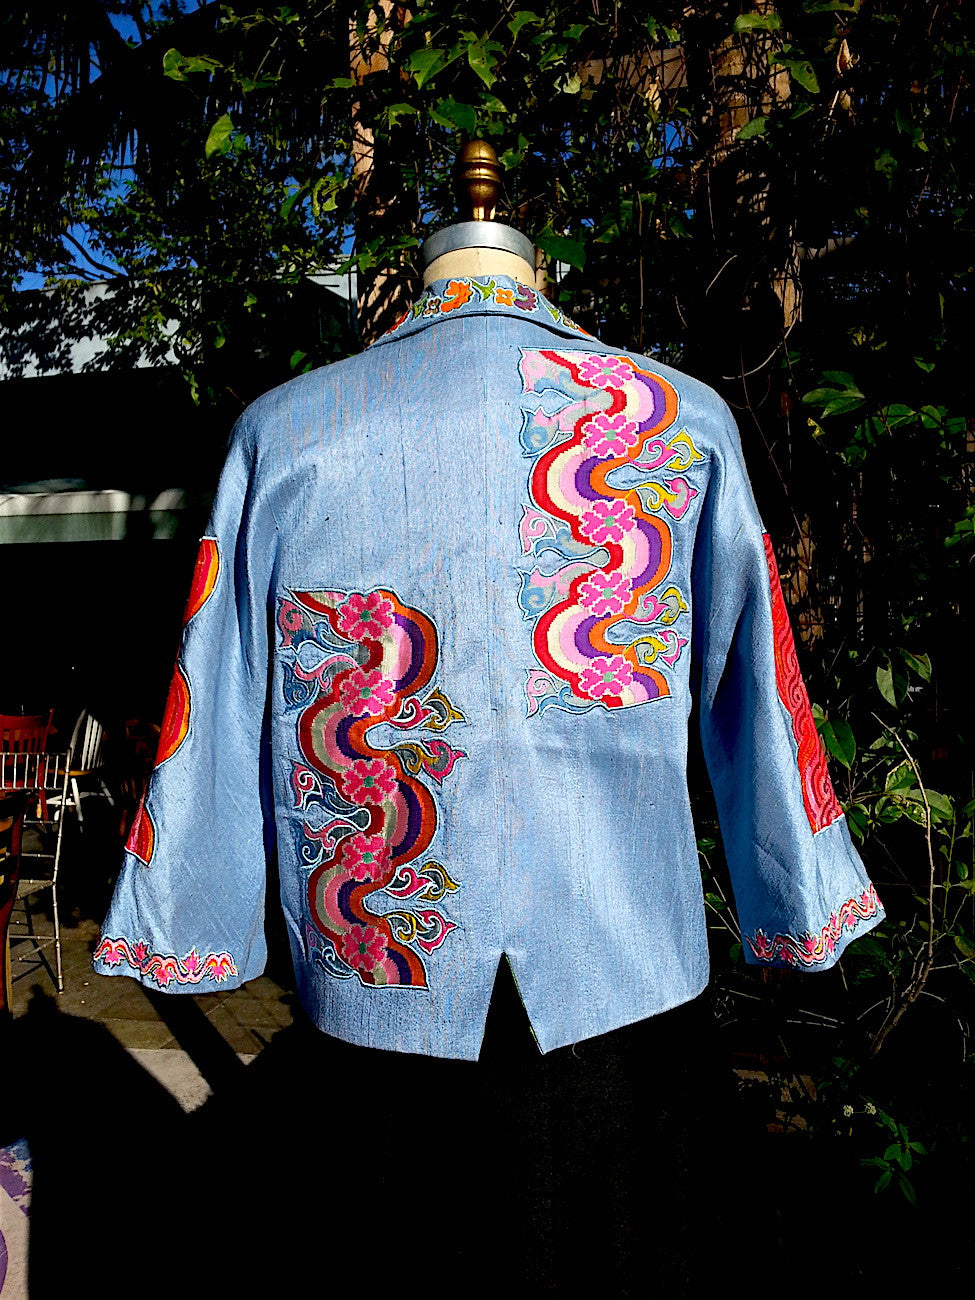 Couture Cut Peace Jacket Baby Blue